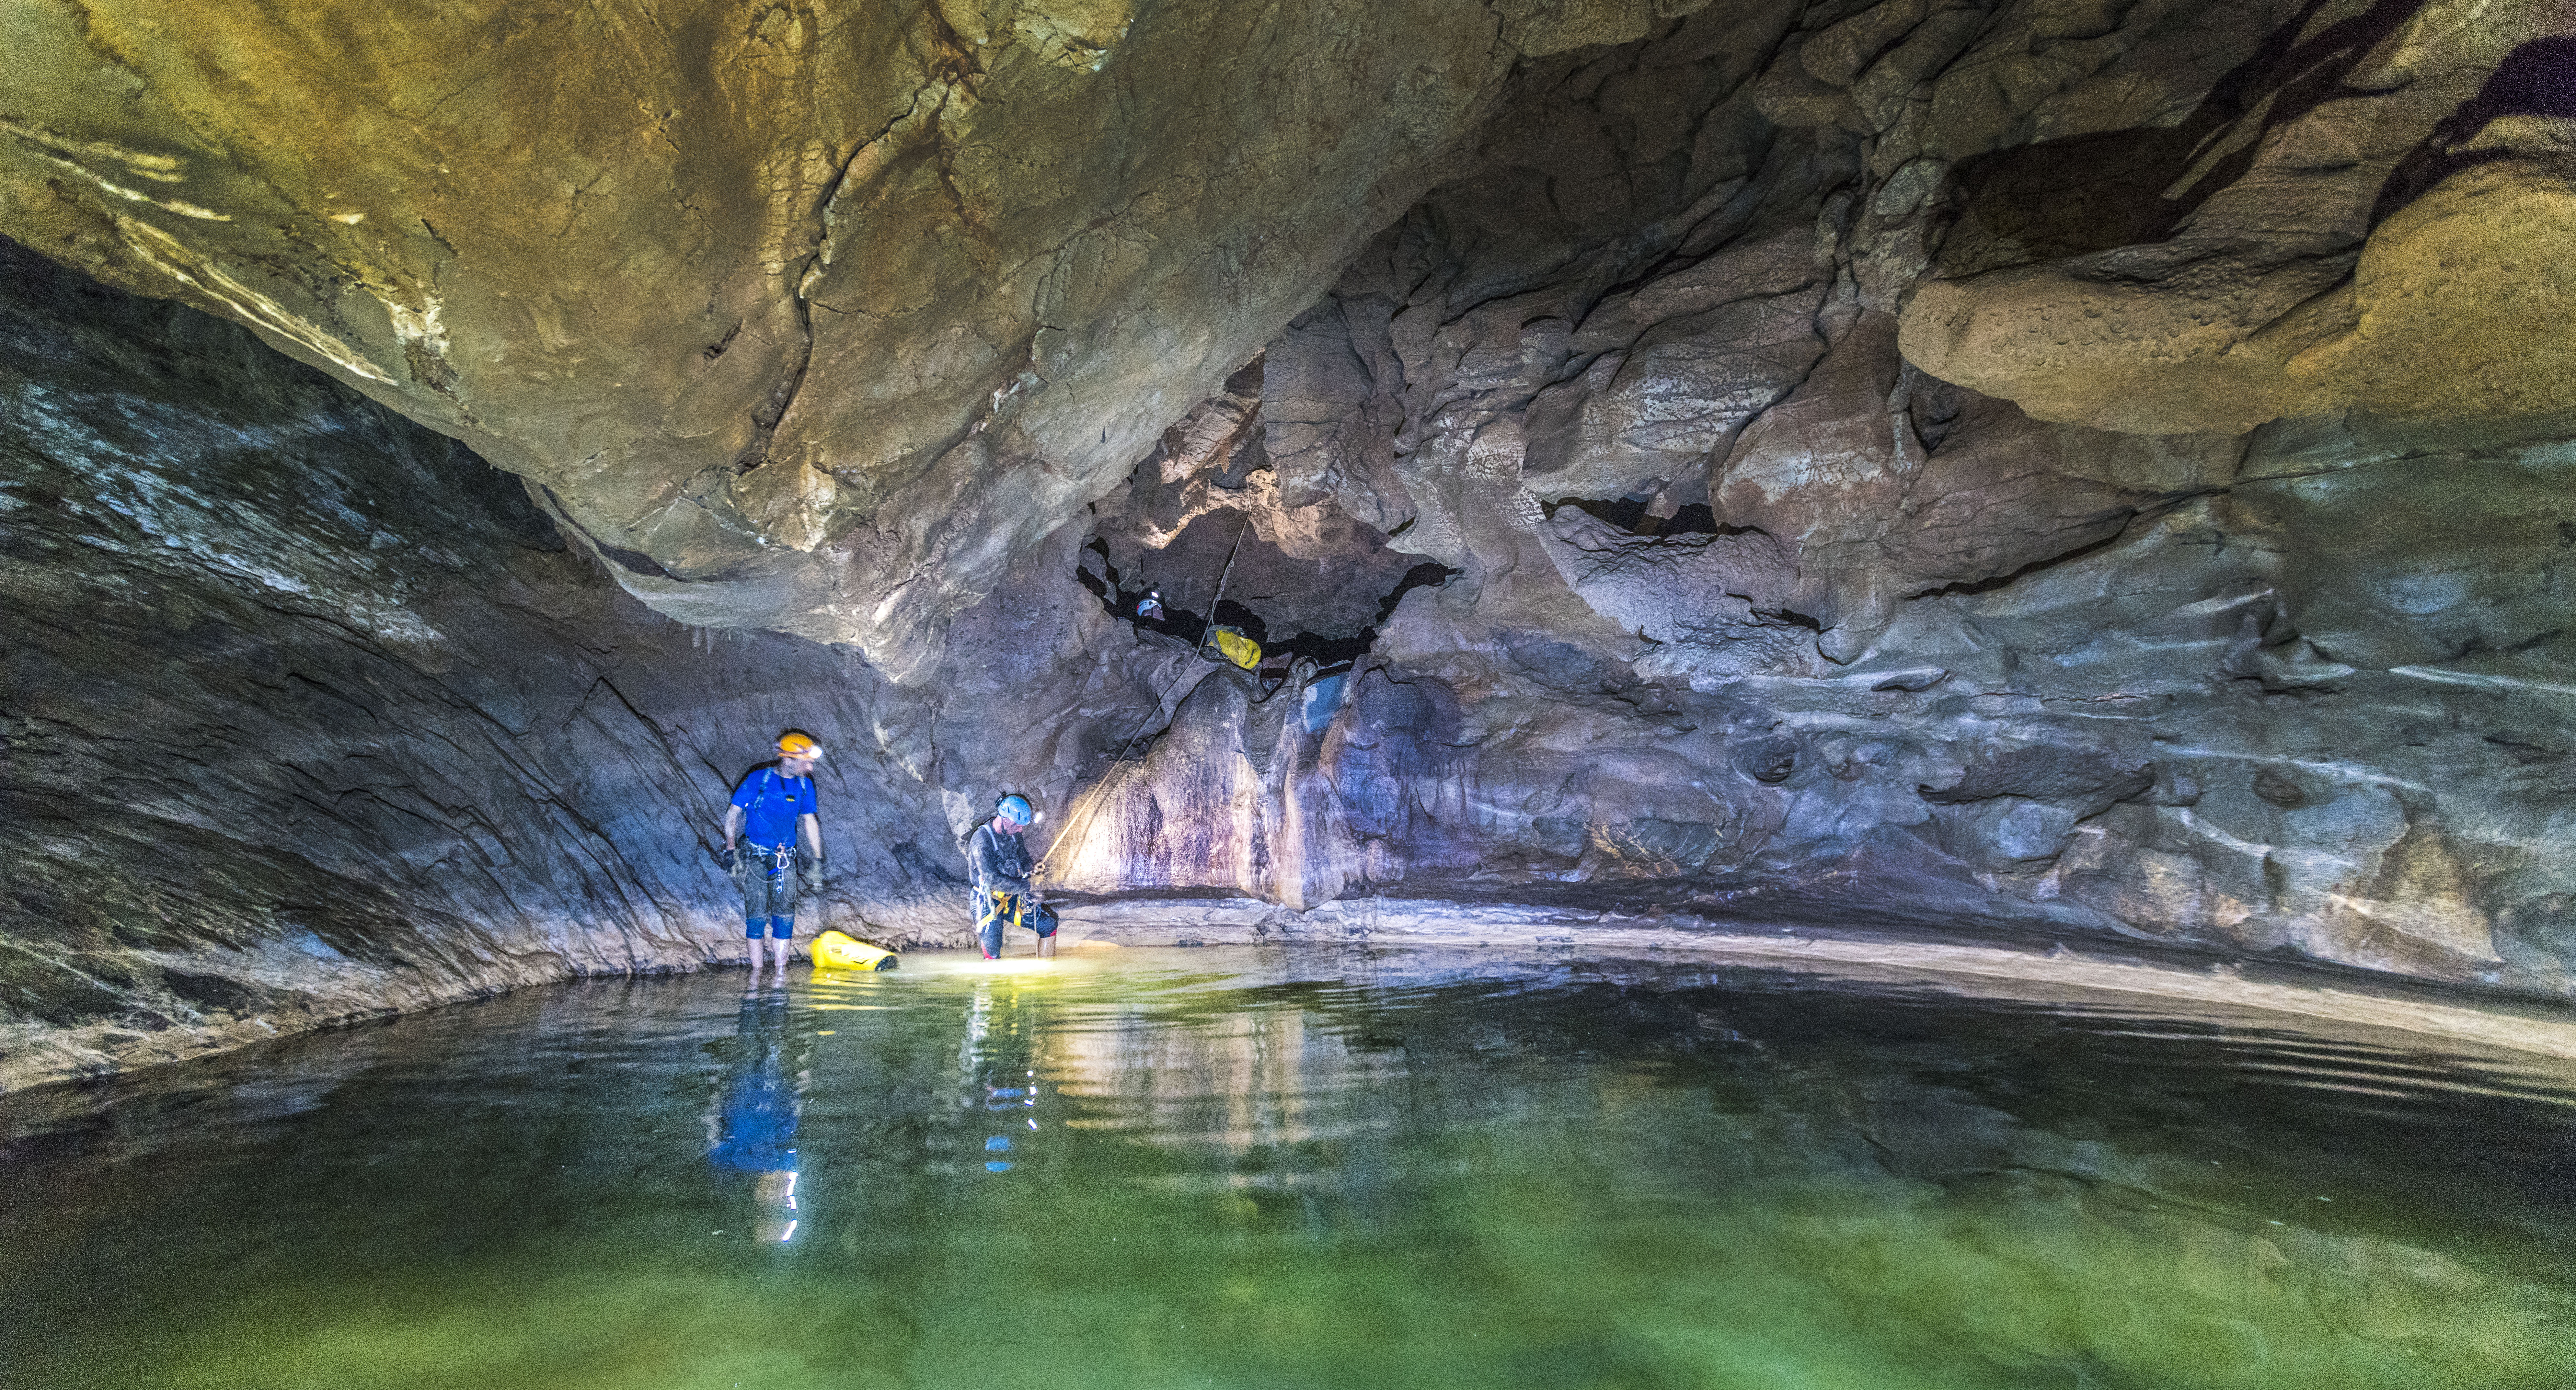 In pictures: Stunning photos of three new caves discovered in Oman